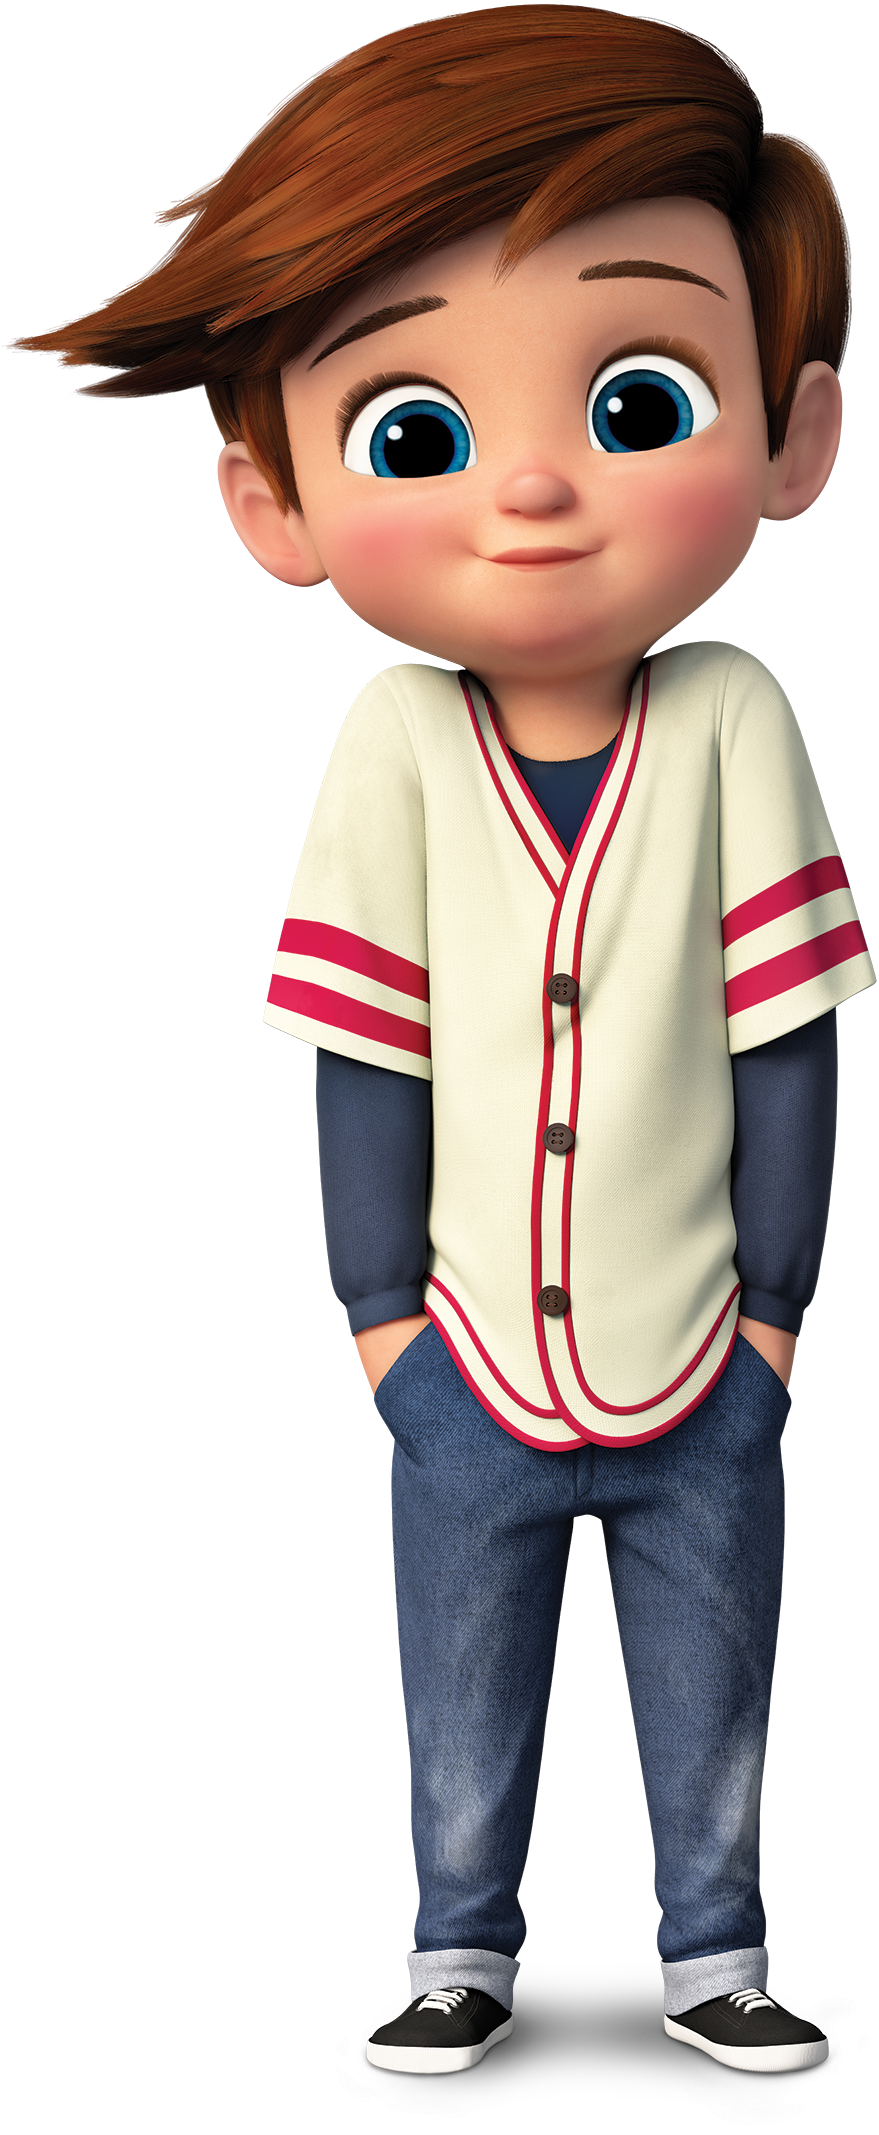 A Cartoon Character With A Baseball Jersey